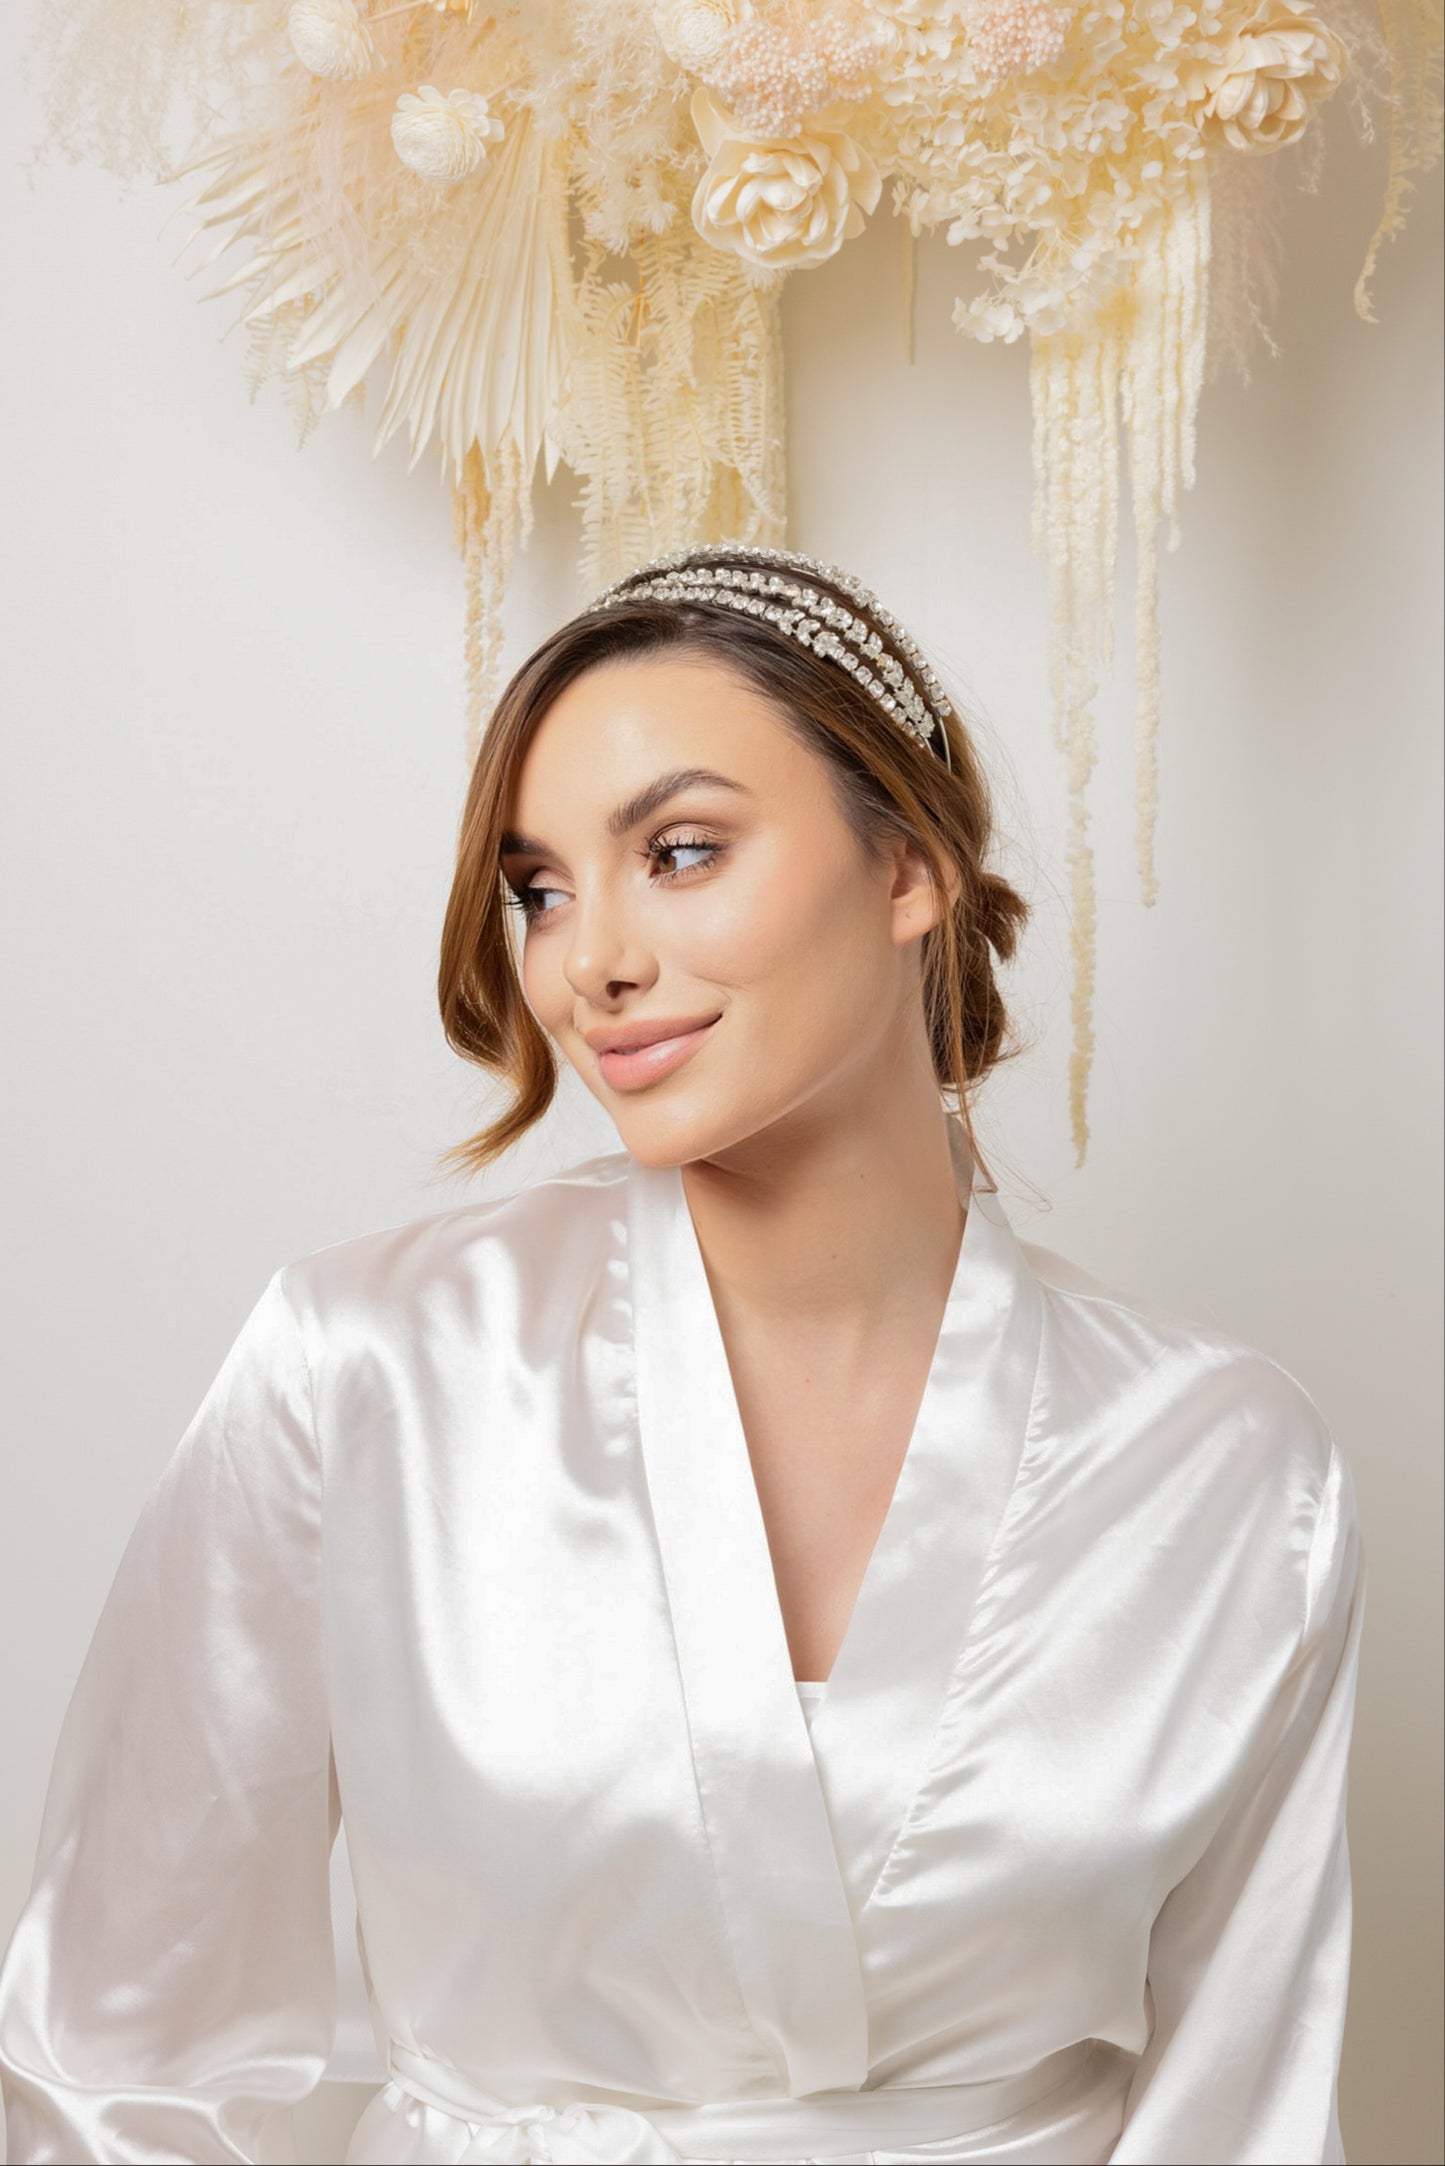 A woman in a white robe and an elegant headband adorned with cubic zirconia